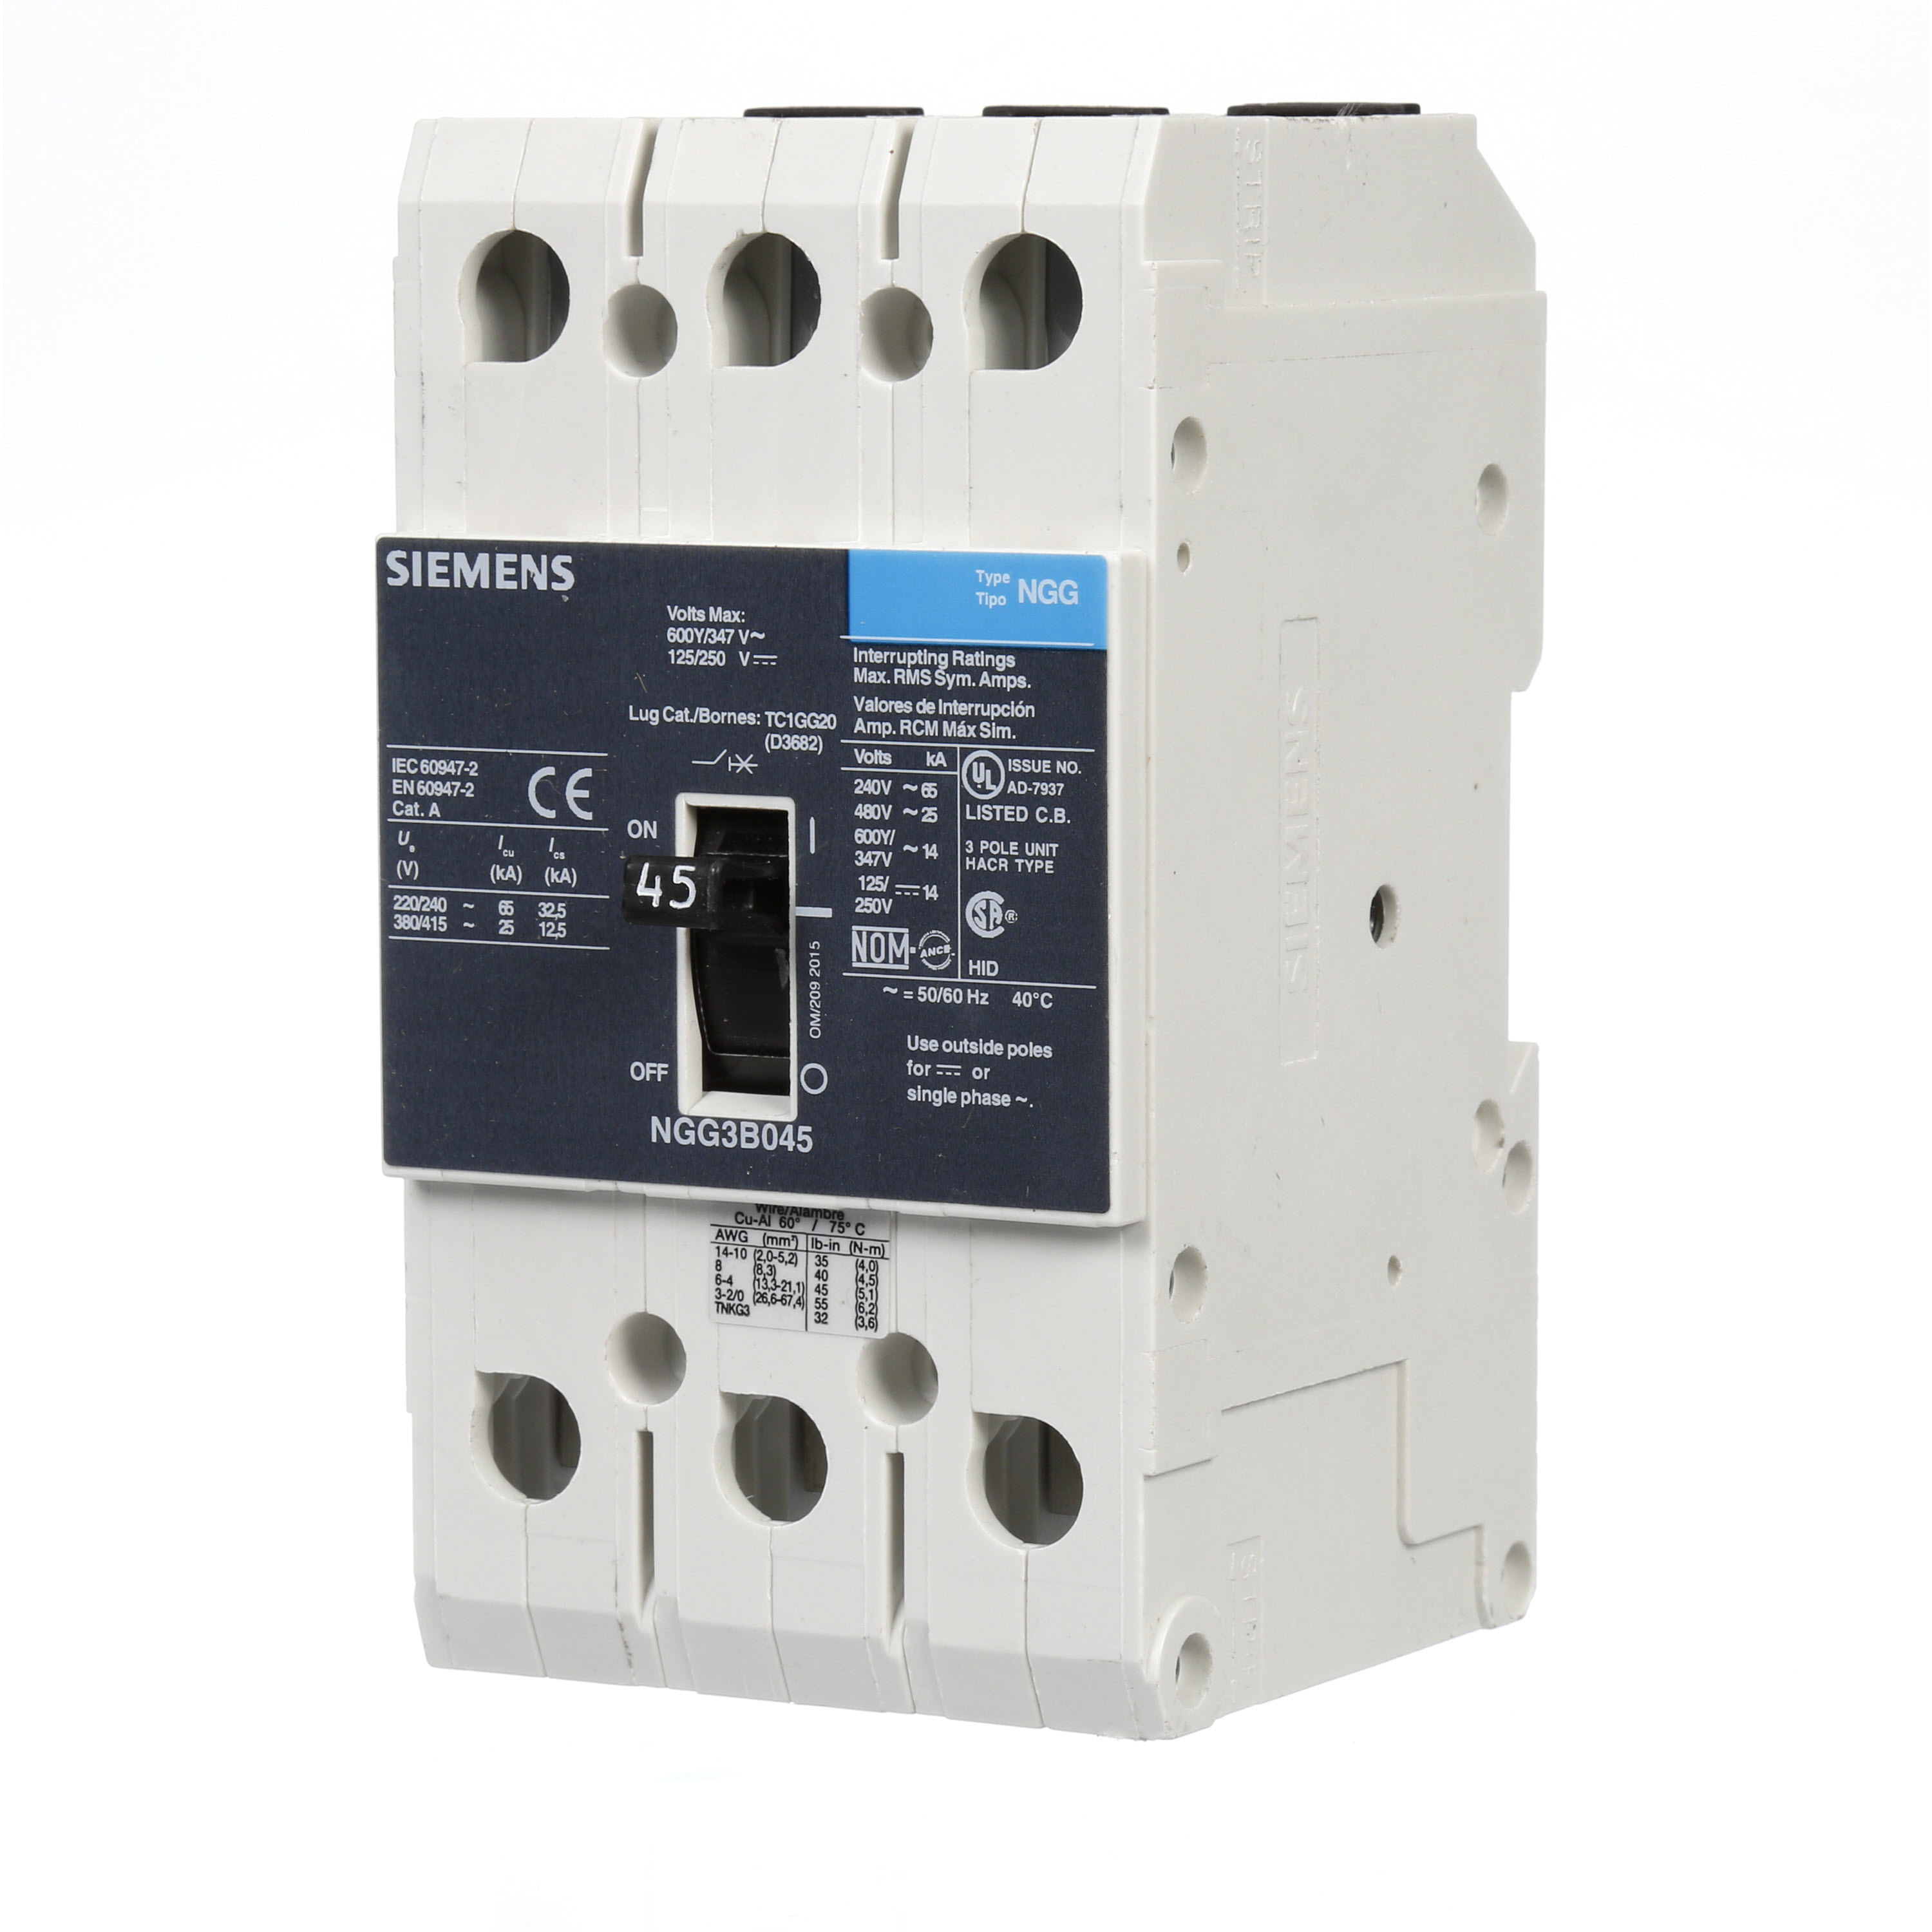 SIEMENS LOW VOLTAGE G FRAME CIRCUIT BREAKER WITH THERMAL - MAGNETIC TRIP. UL LISTED NGG FRAME WITH STANDARD BREAKING CAPACITY. 45A 3-POLE (14KAIC AT 600Y/347V)(25KAIC AT 480V). SPECIAL FEATURES MOUNTS ON DIN RAIL / SCREW, LINE AND LOAD SIDE LUGS (TC1GG20) WIRE RANGE 8 - 1/0 AWS (CU/AL). DIMENSIONS (W x H x D) IN 3 x 5.4 x 2.8.